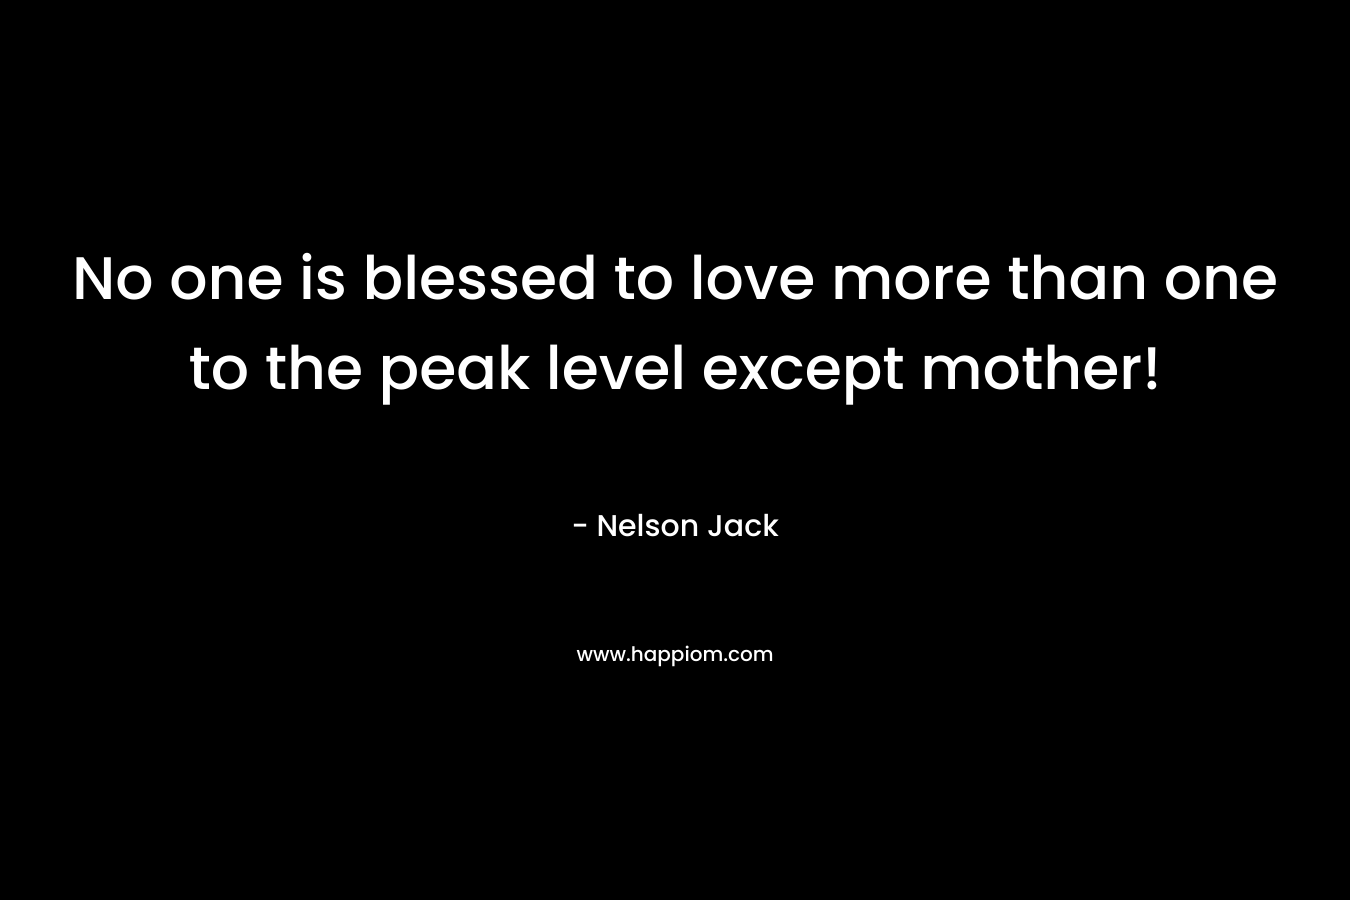 No one is blessed to love more than one to the peak level except mother! – Nelson Jack